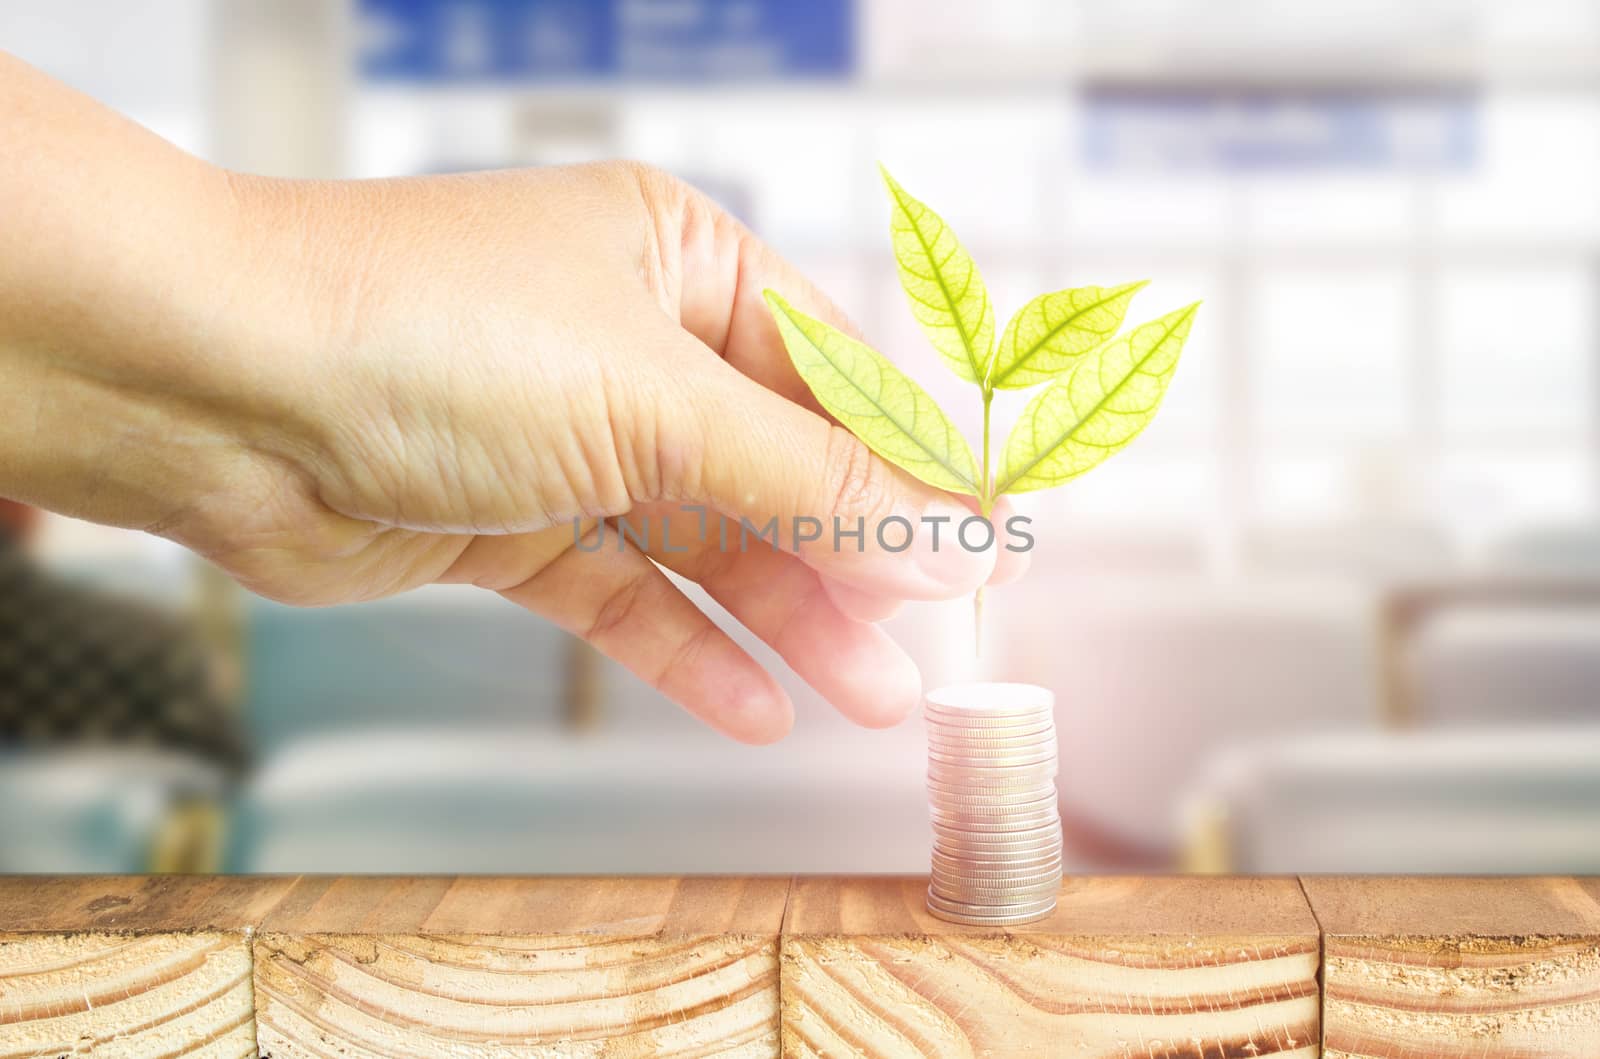 Close-Up Of Female Hand Pick Up The Leaf On The Coin With Office Blur Background ,Business Finance And Money Concept, Business Investment Growth Concept